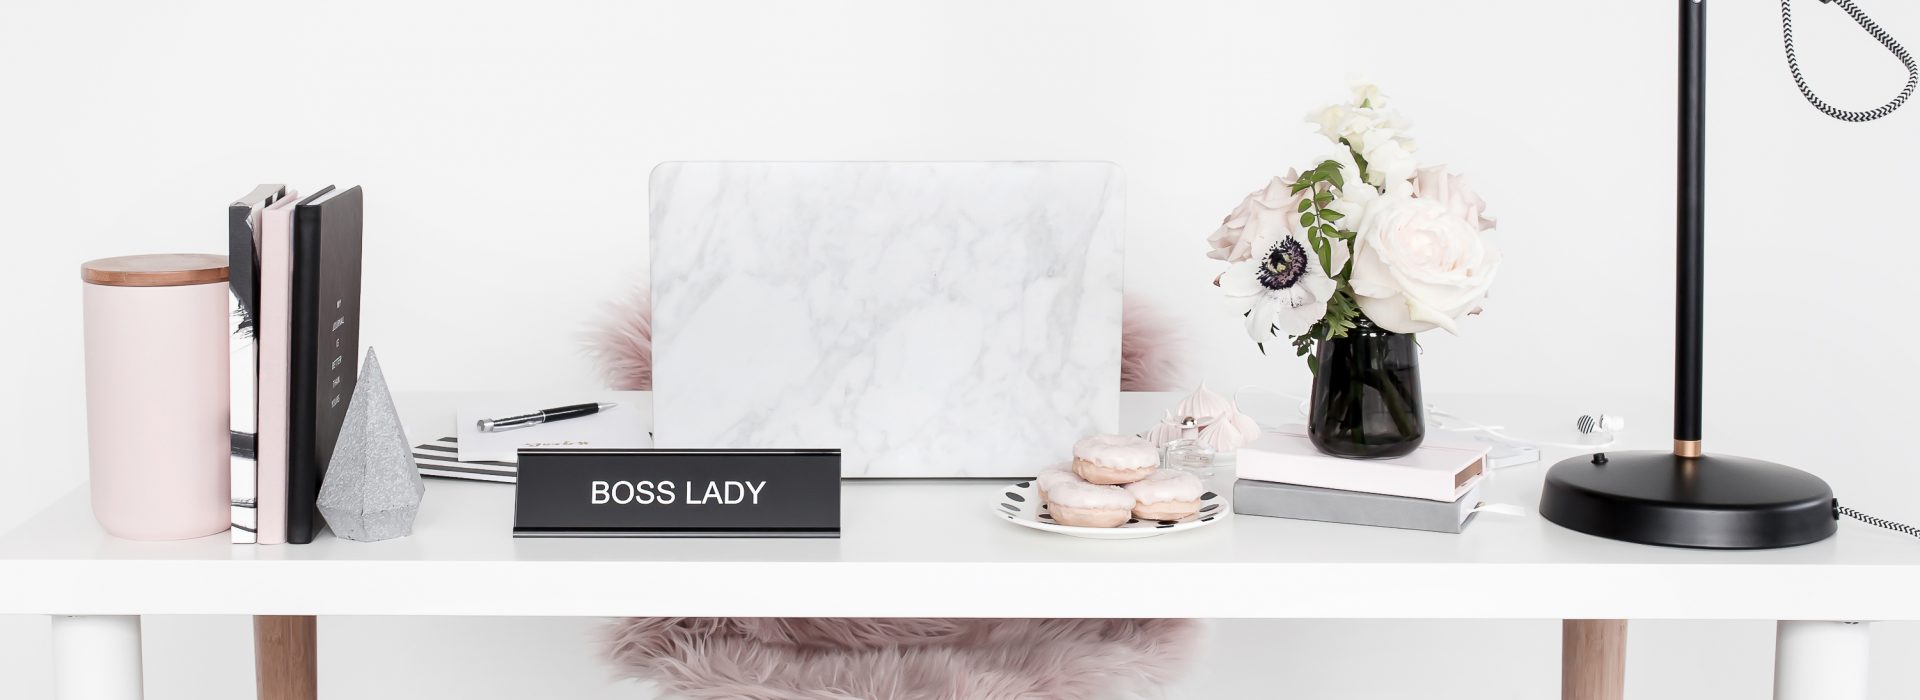 cropped-haute-stock-photography-muted-blush-black-workspace-final-2-1-1.jpg